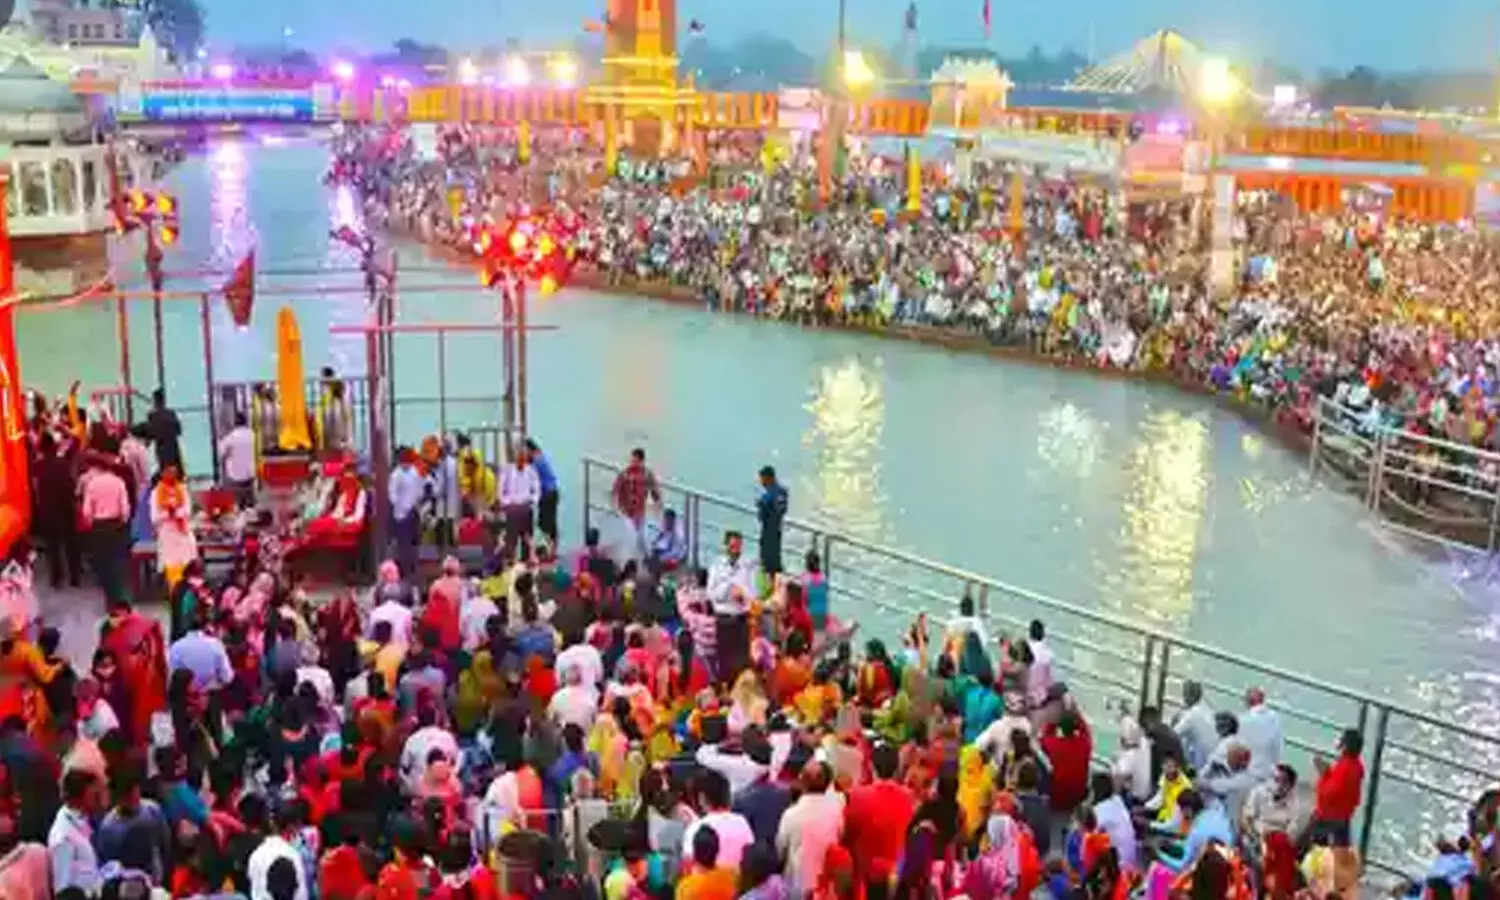 PM Modi says Kumbh Mela should now only be symbolic to strengthen Covid-19 fight